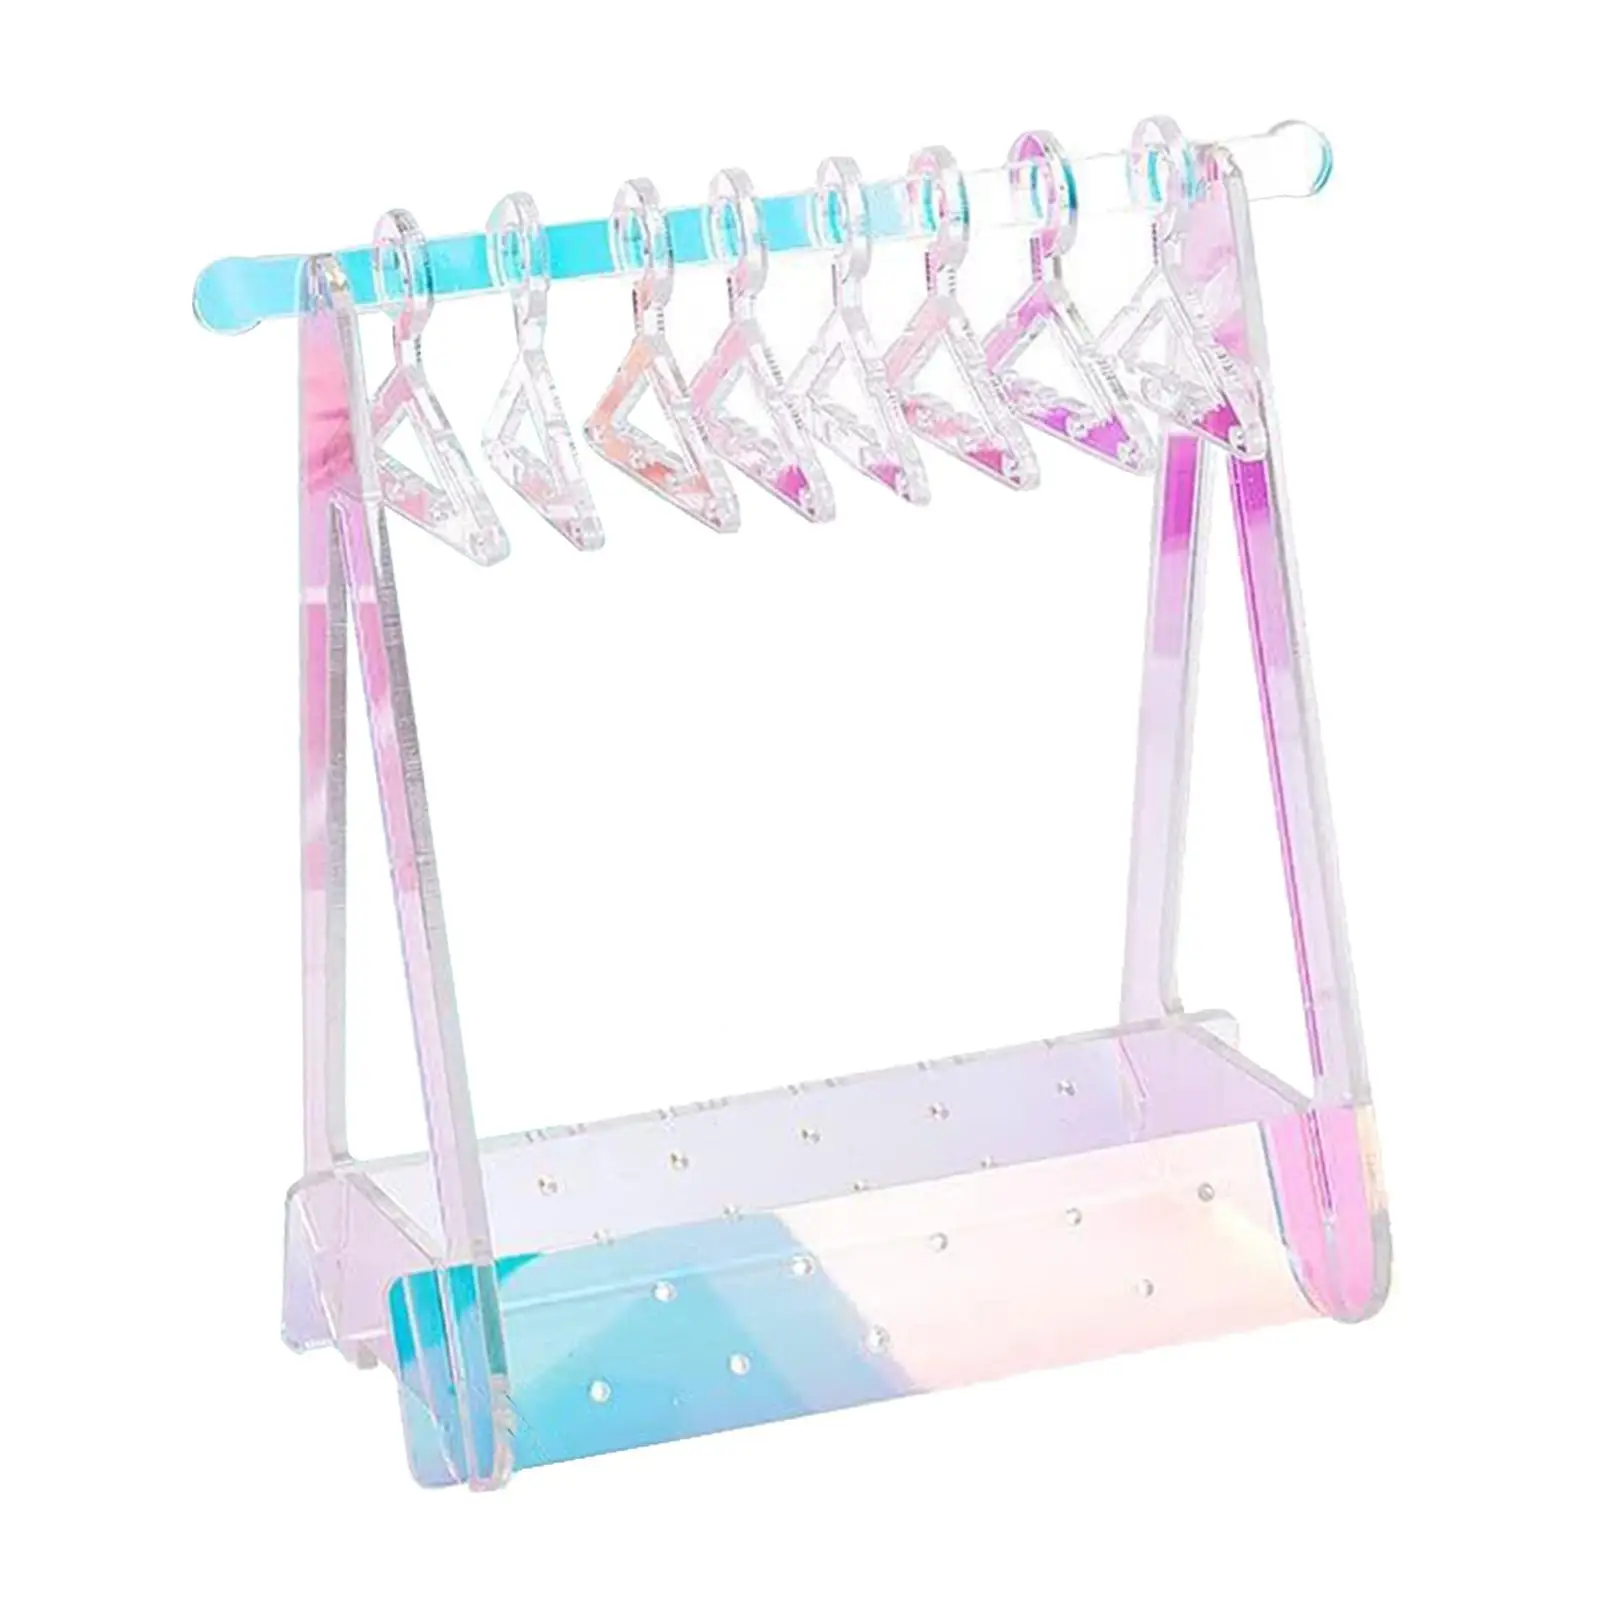 Jewelry Display Rack Necklace Display Storage for Shops Table Top Dresser